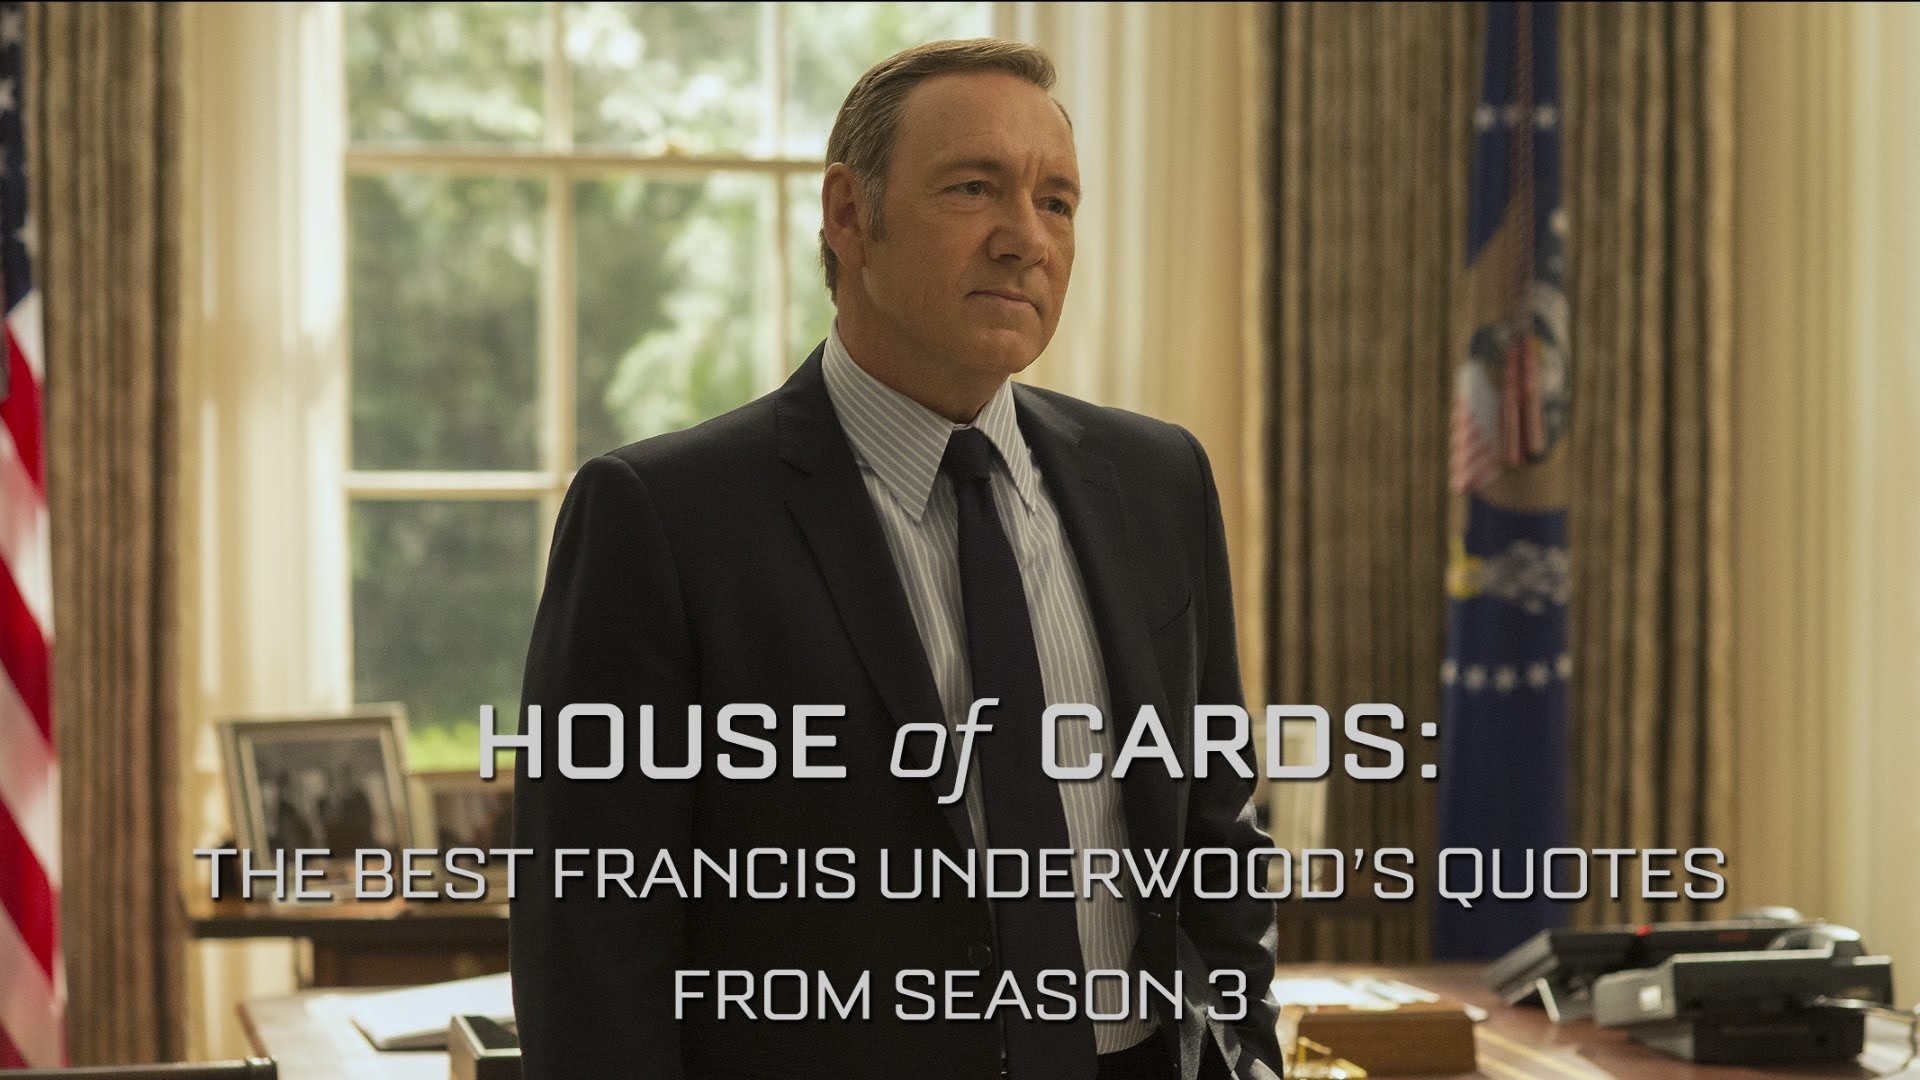 1920x1080 House of Cards: The Best Francis Underwood's Quotes from Season 3 - YouTube